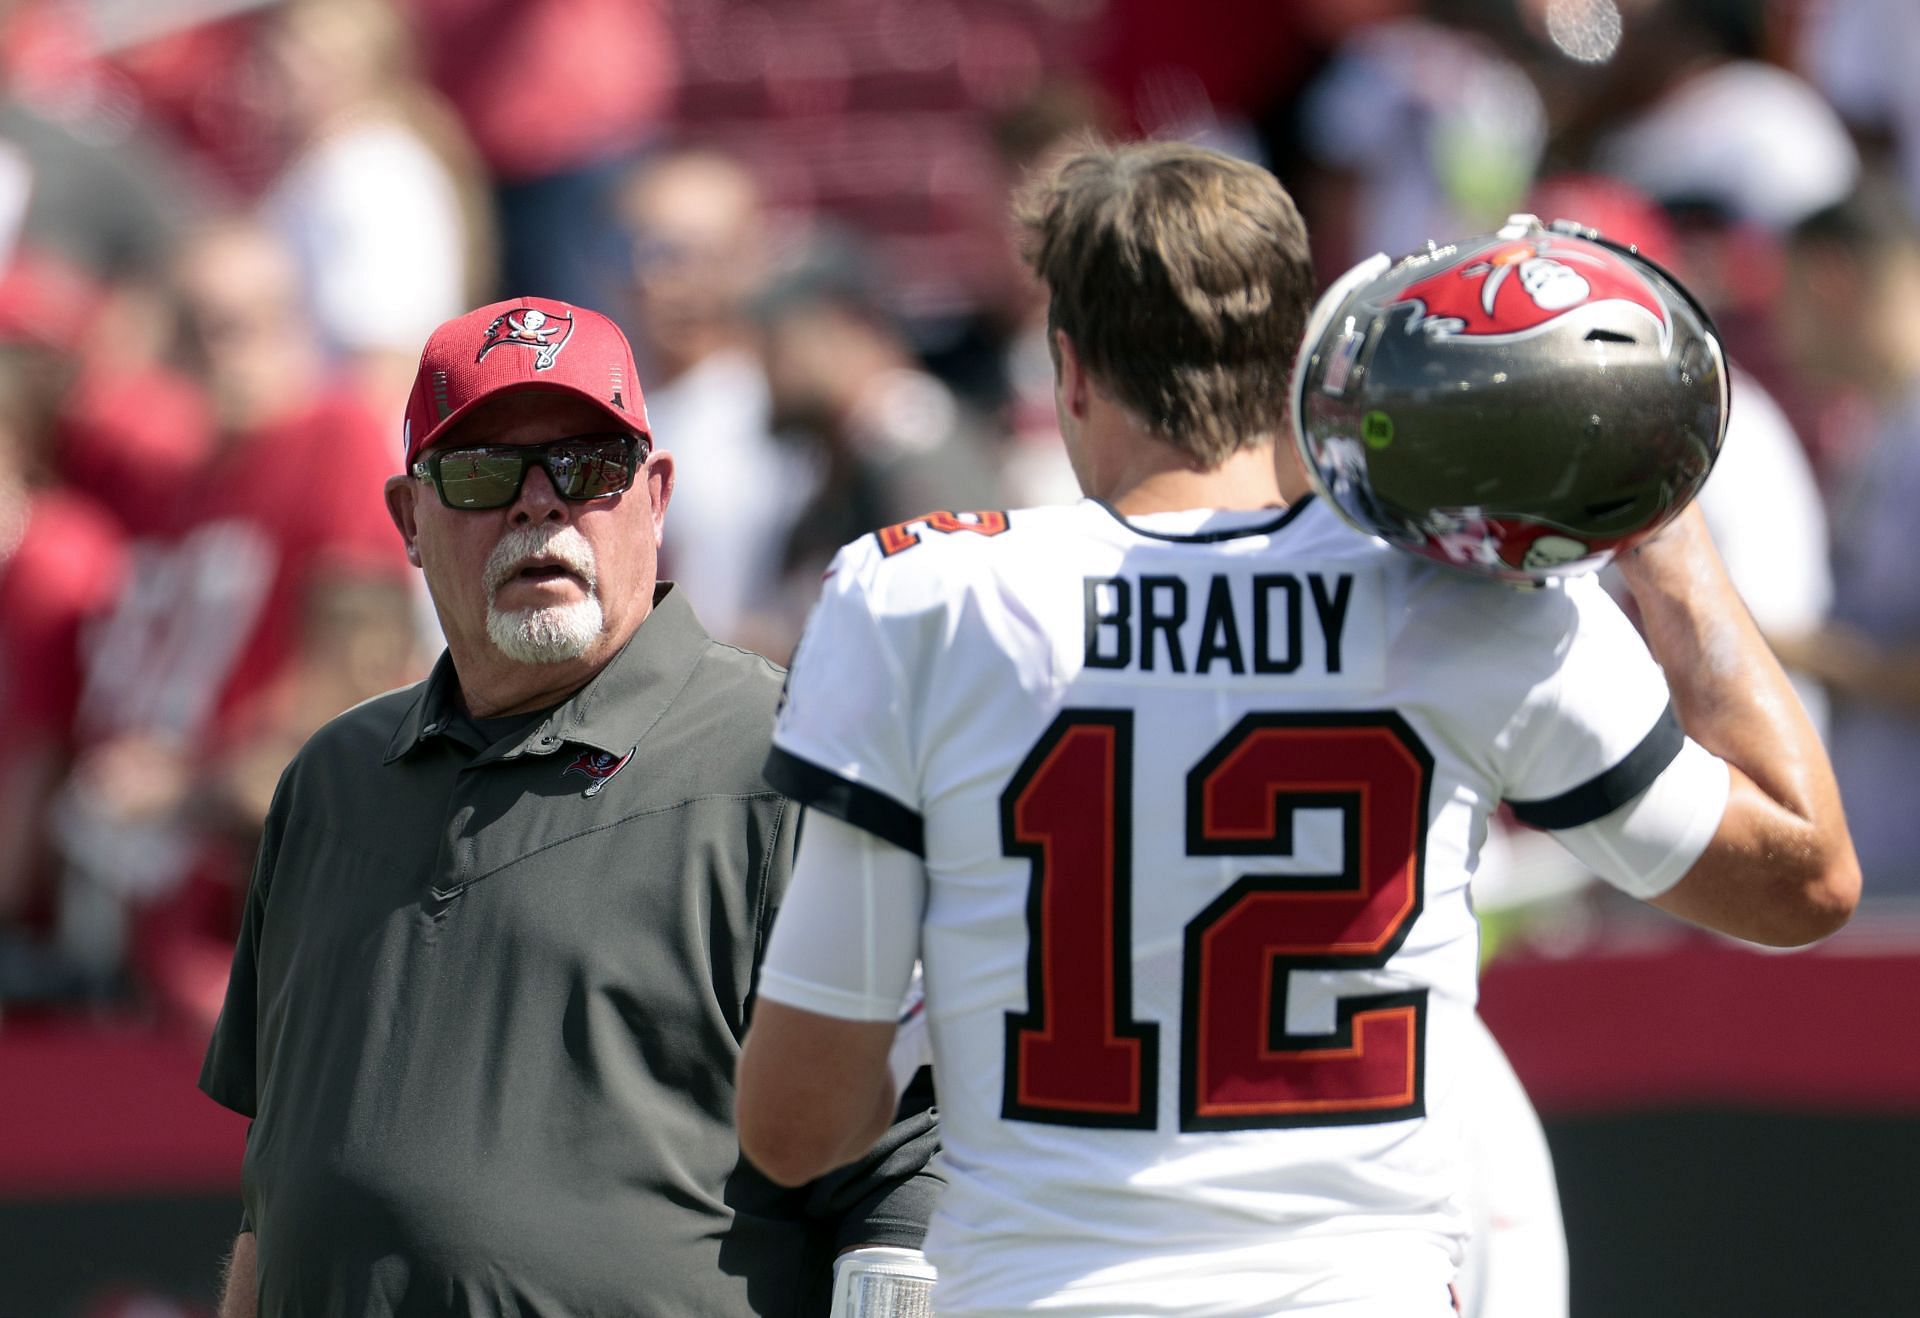 Bruce Arians and Tom Brady on the Tampa Bay Buccaneers sideline